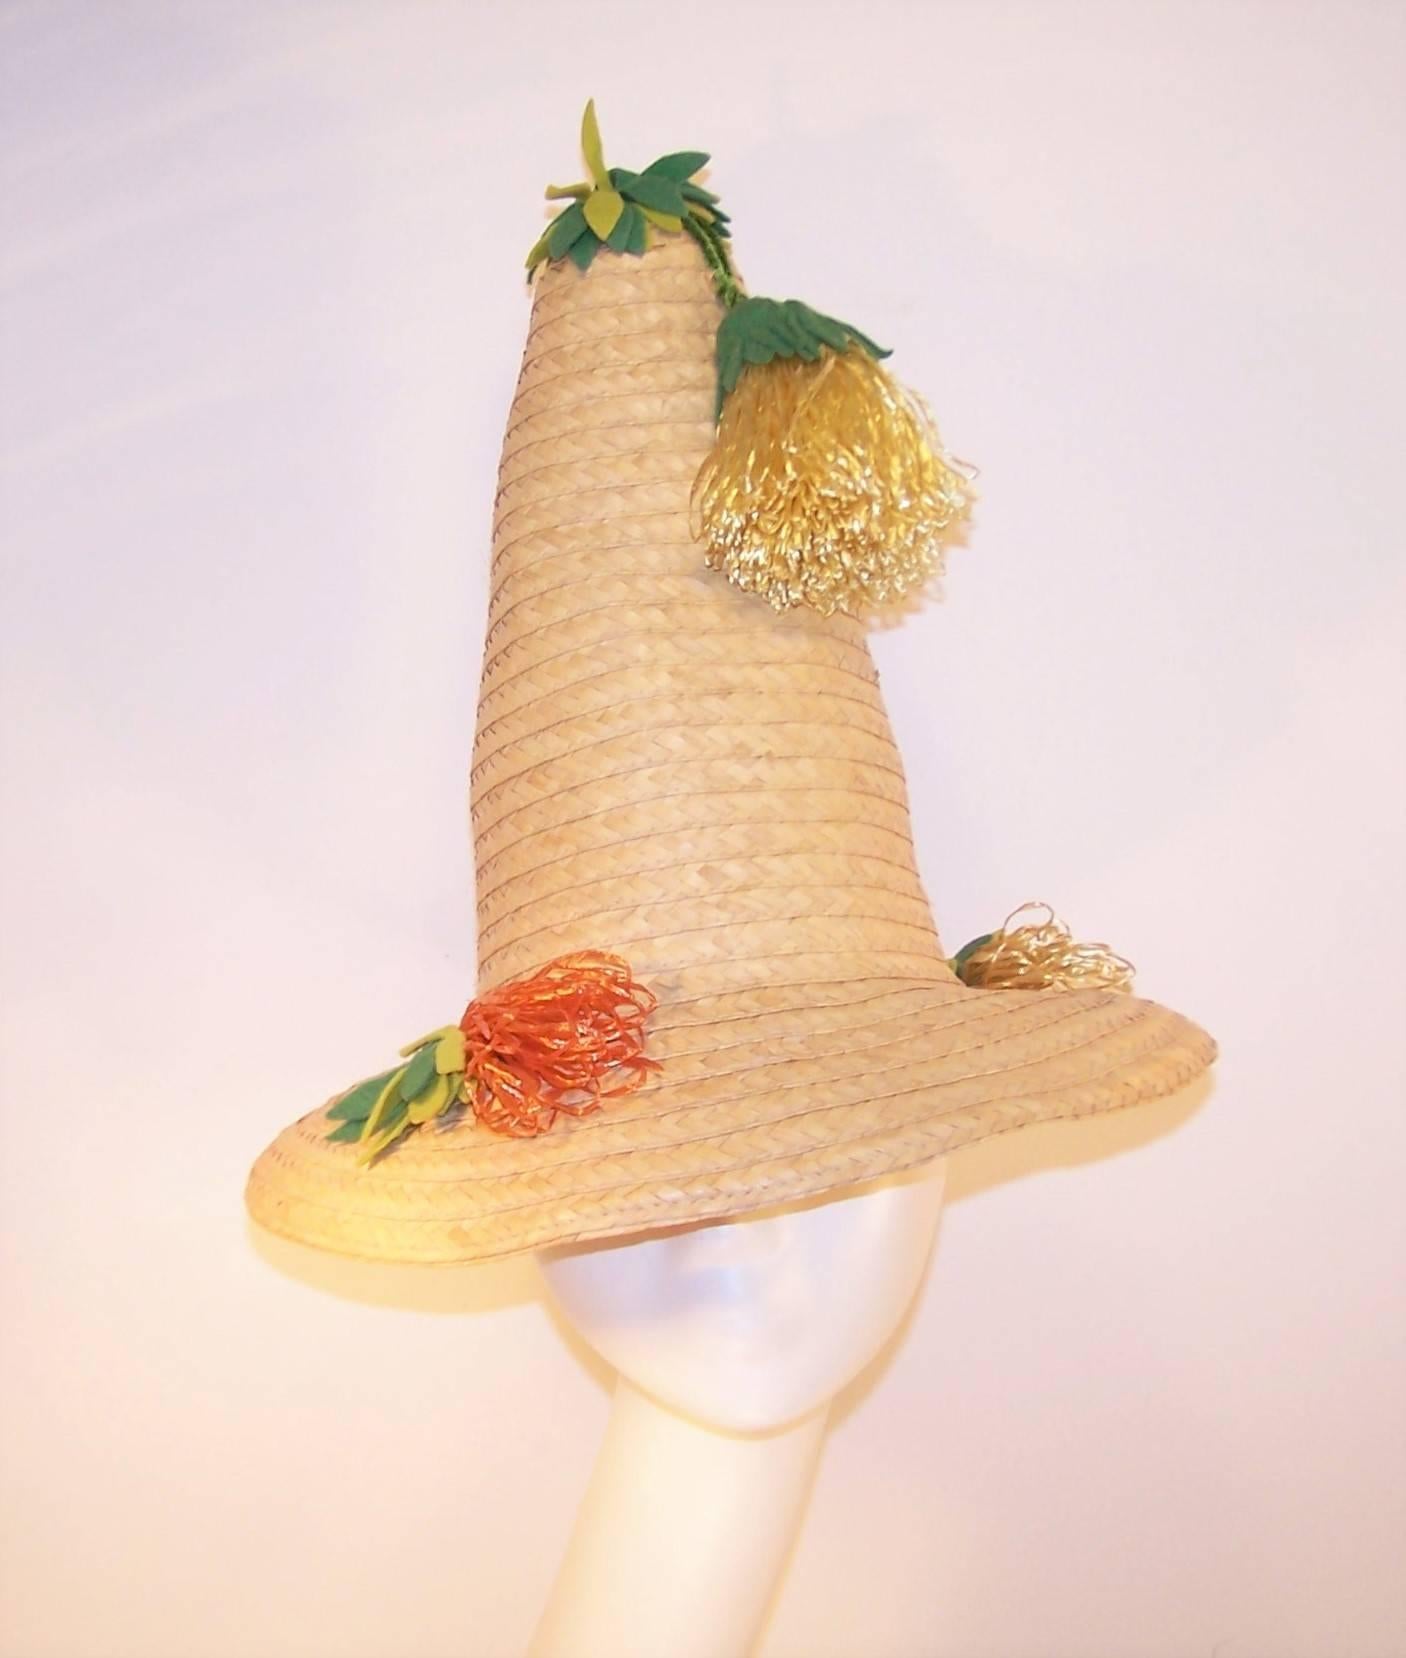 You'll be the life of the party when you show up with this whimsical 1950's straw hat.  The exaggerated conical shape is decorated with green felt leaves and synthetic grass flowers in yellow and orange.  A whole lotta pool side fun!  Excellent